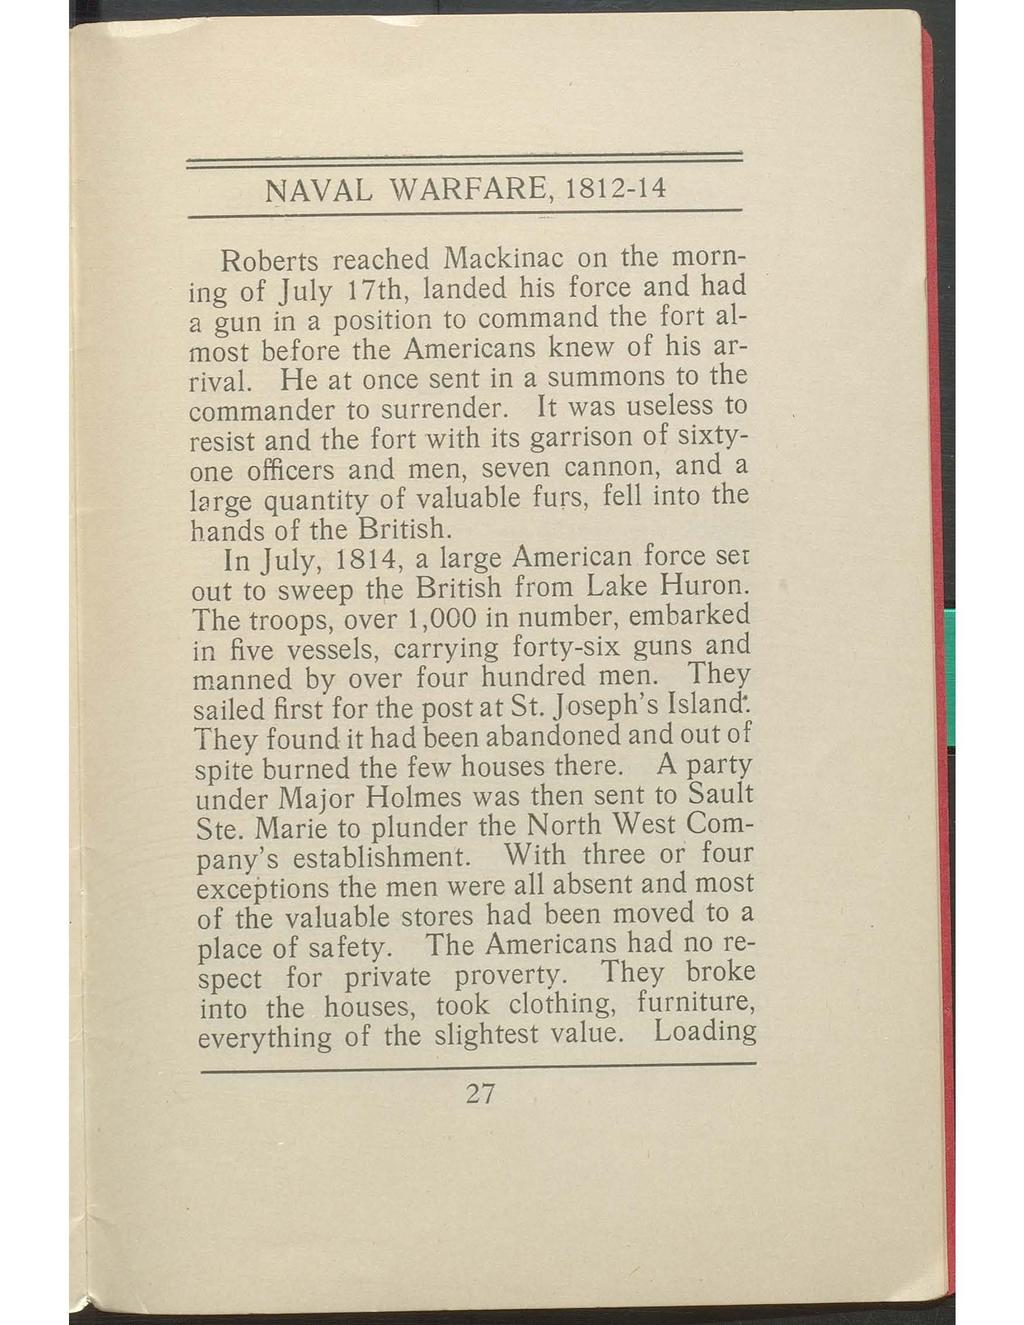 NAVAL WARFARE, 1812-14 Roberts reached Mackinac on the morning of ] uly 17th, landed his force and had a gun in a position to command the fort almost before the Americans knew of his arrival.